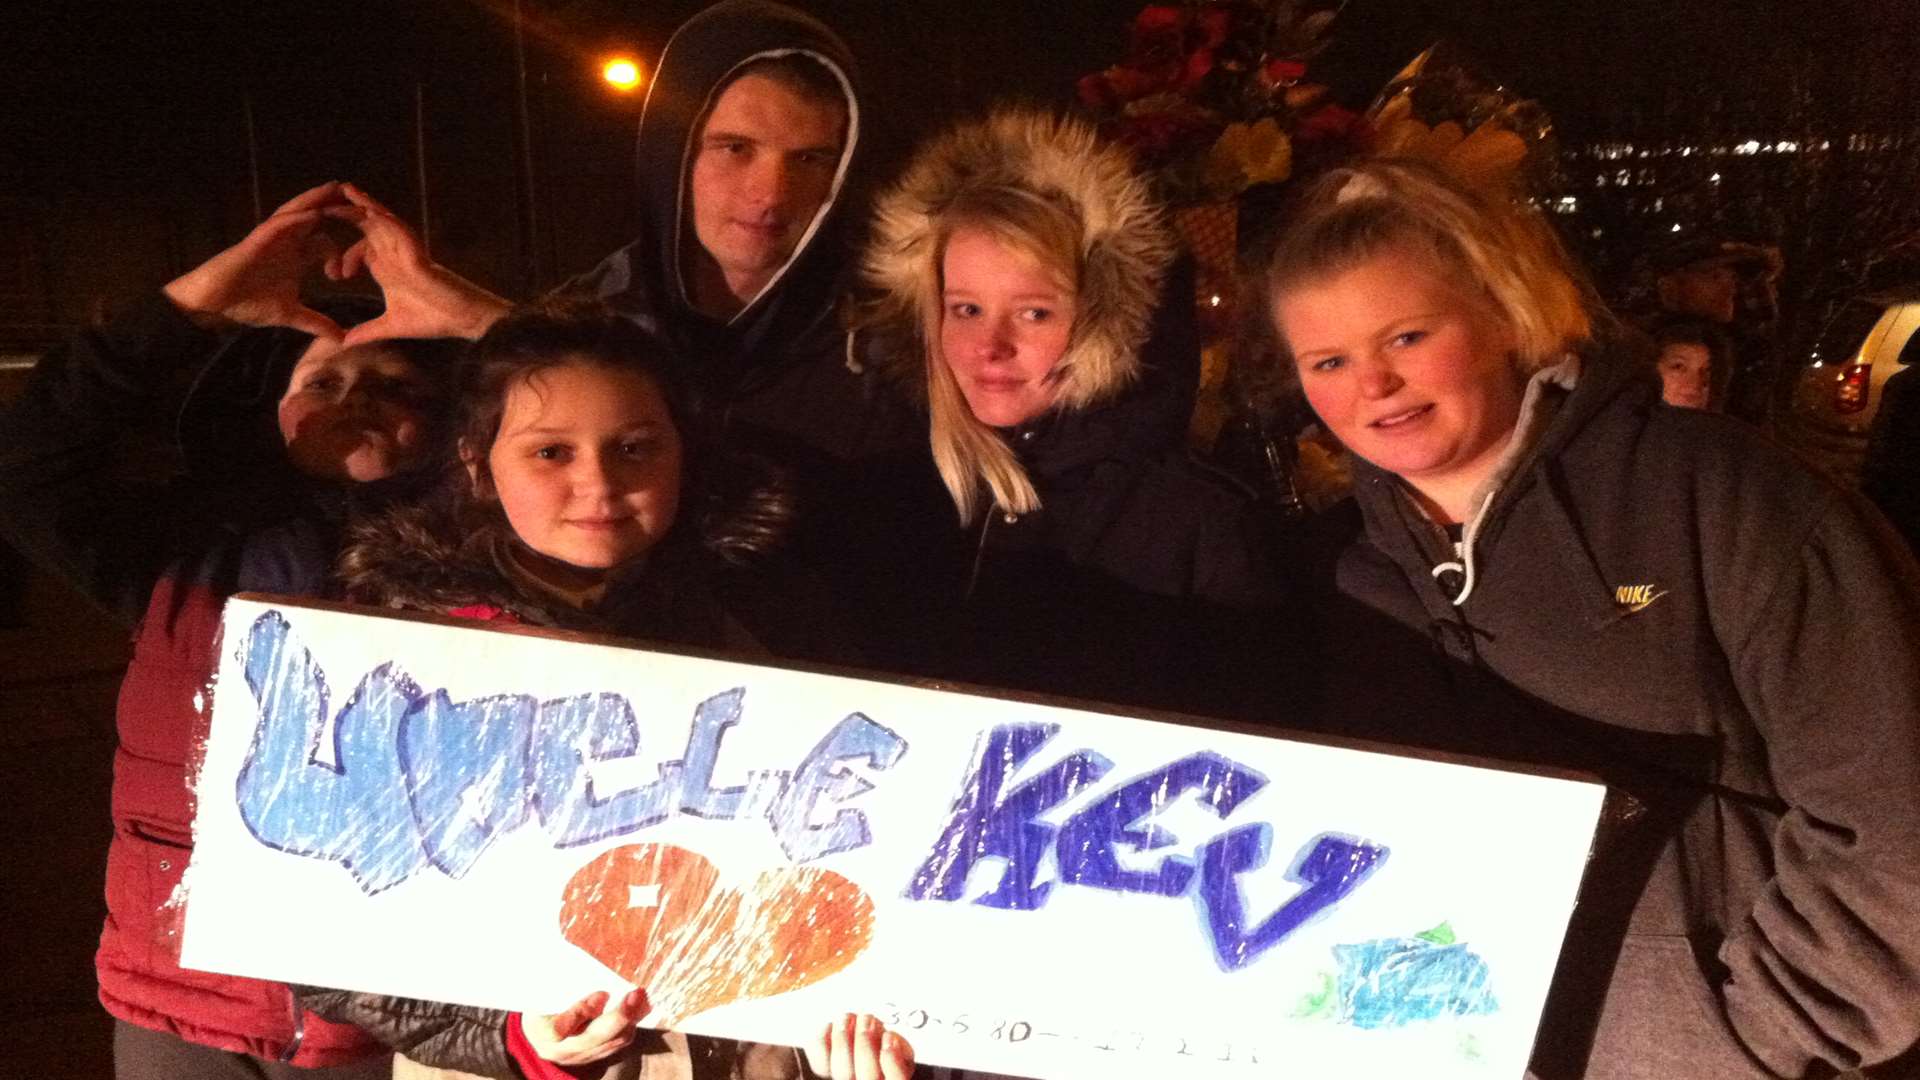 Kevin McKinley's nieces and nephews with a painted canvas they made.